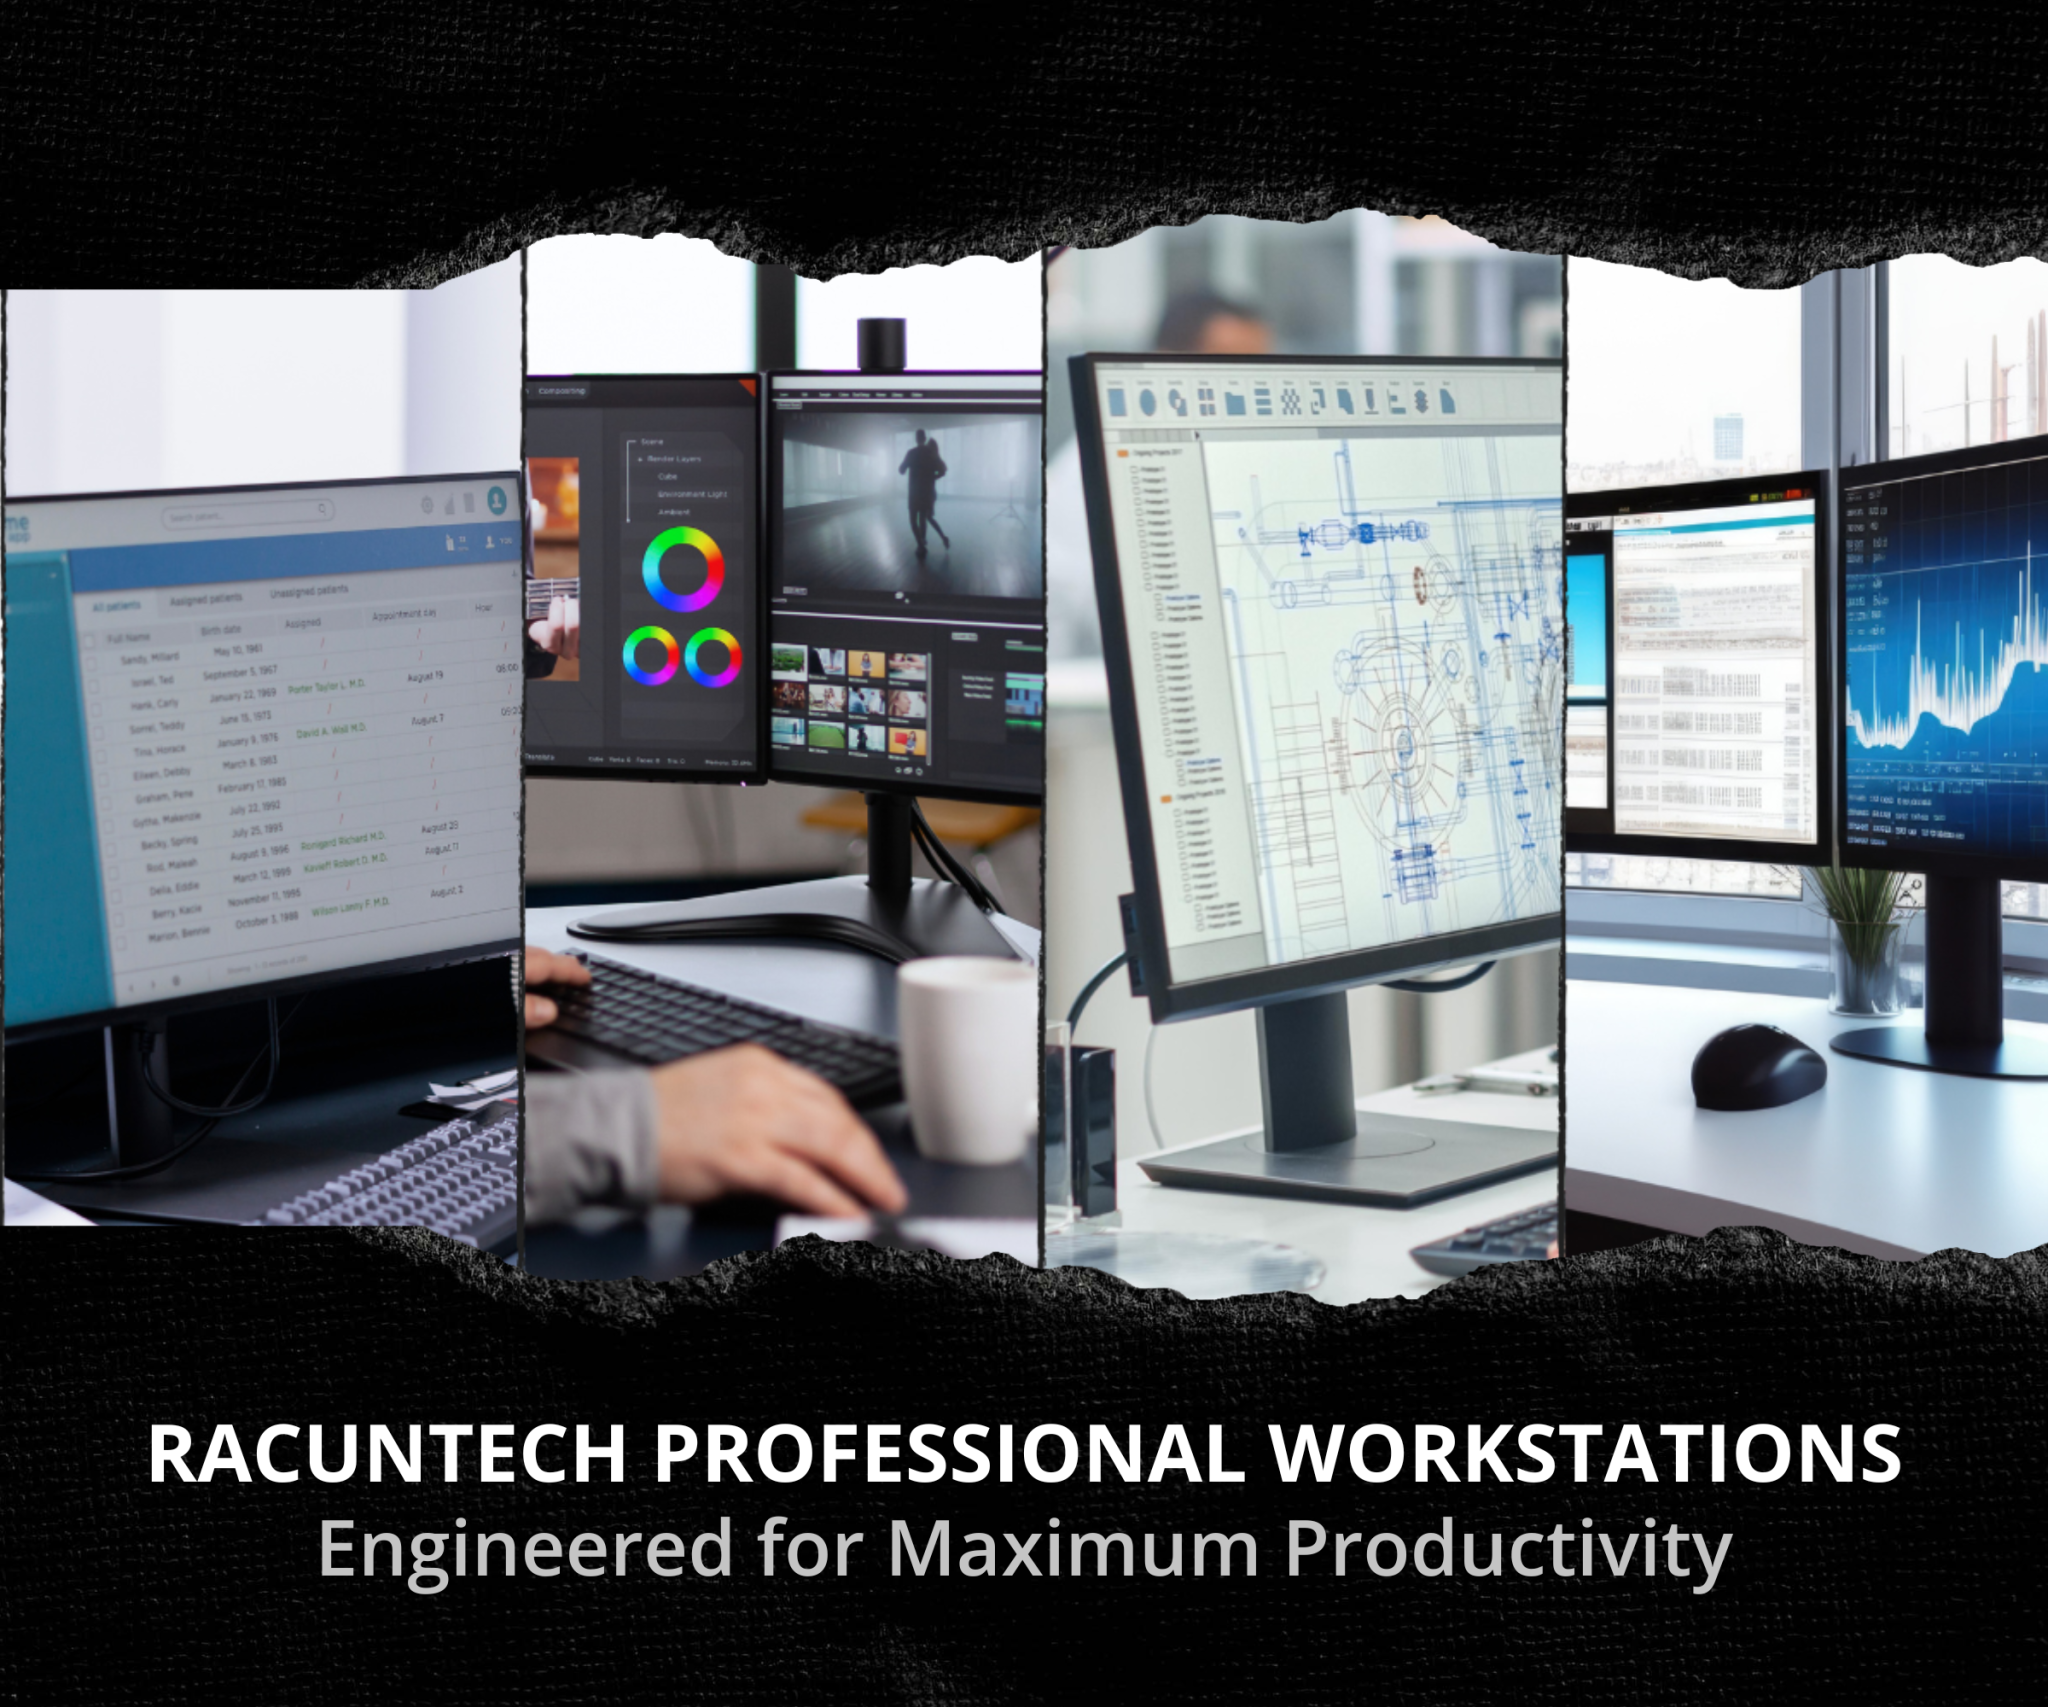 Professional Workstations